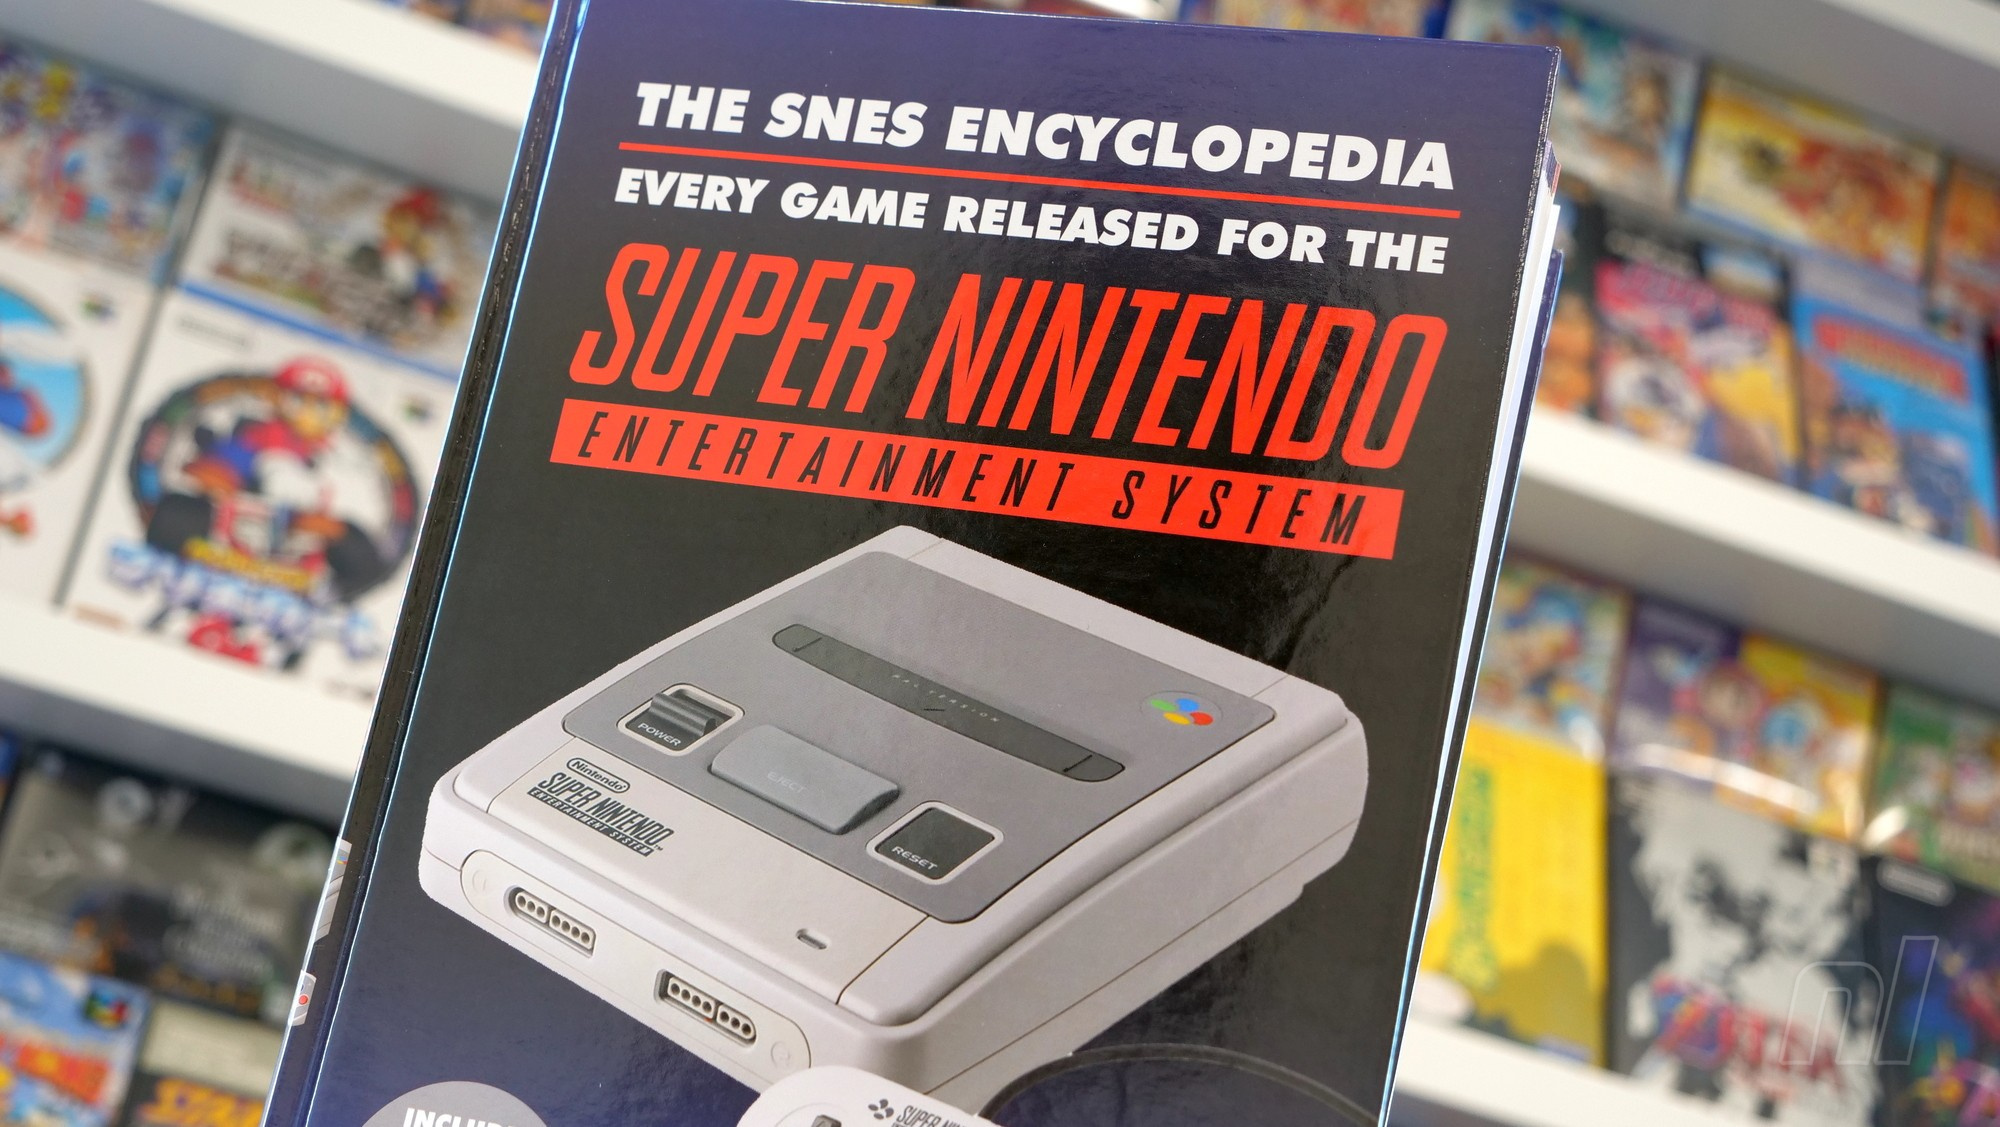 The SNES Encyclopedia Is An Exhaustive 